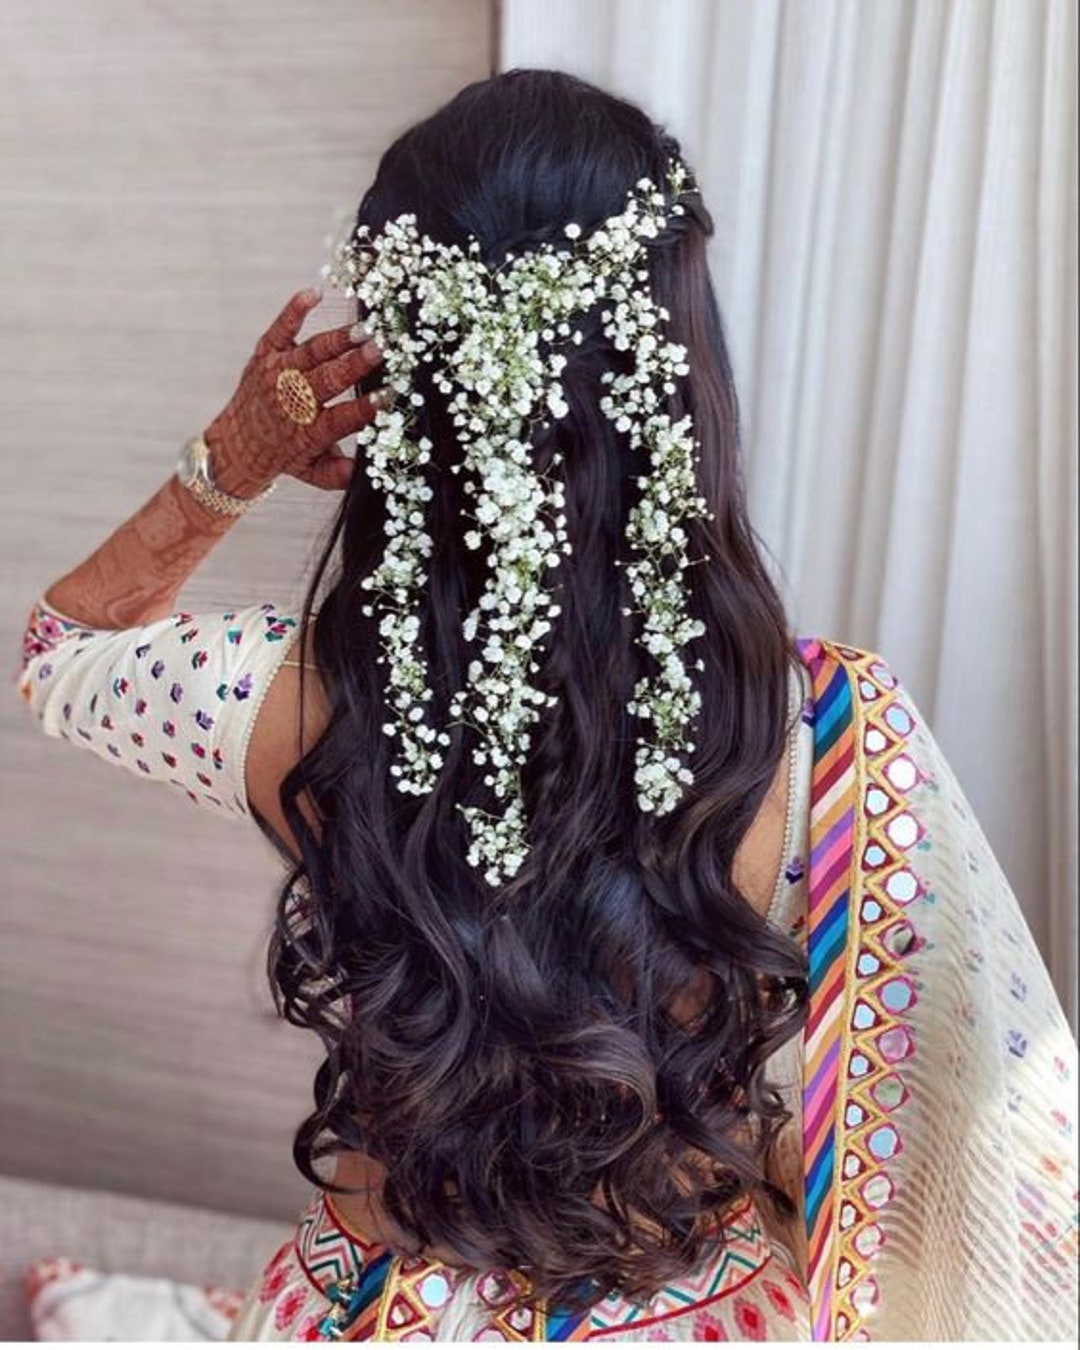 Beautiful party wear Hairstyle  Beautiful party wear Hairstyle  girlshairstyles sumantv  By Sumantv Fashions  Facebook